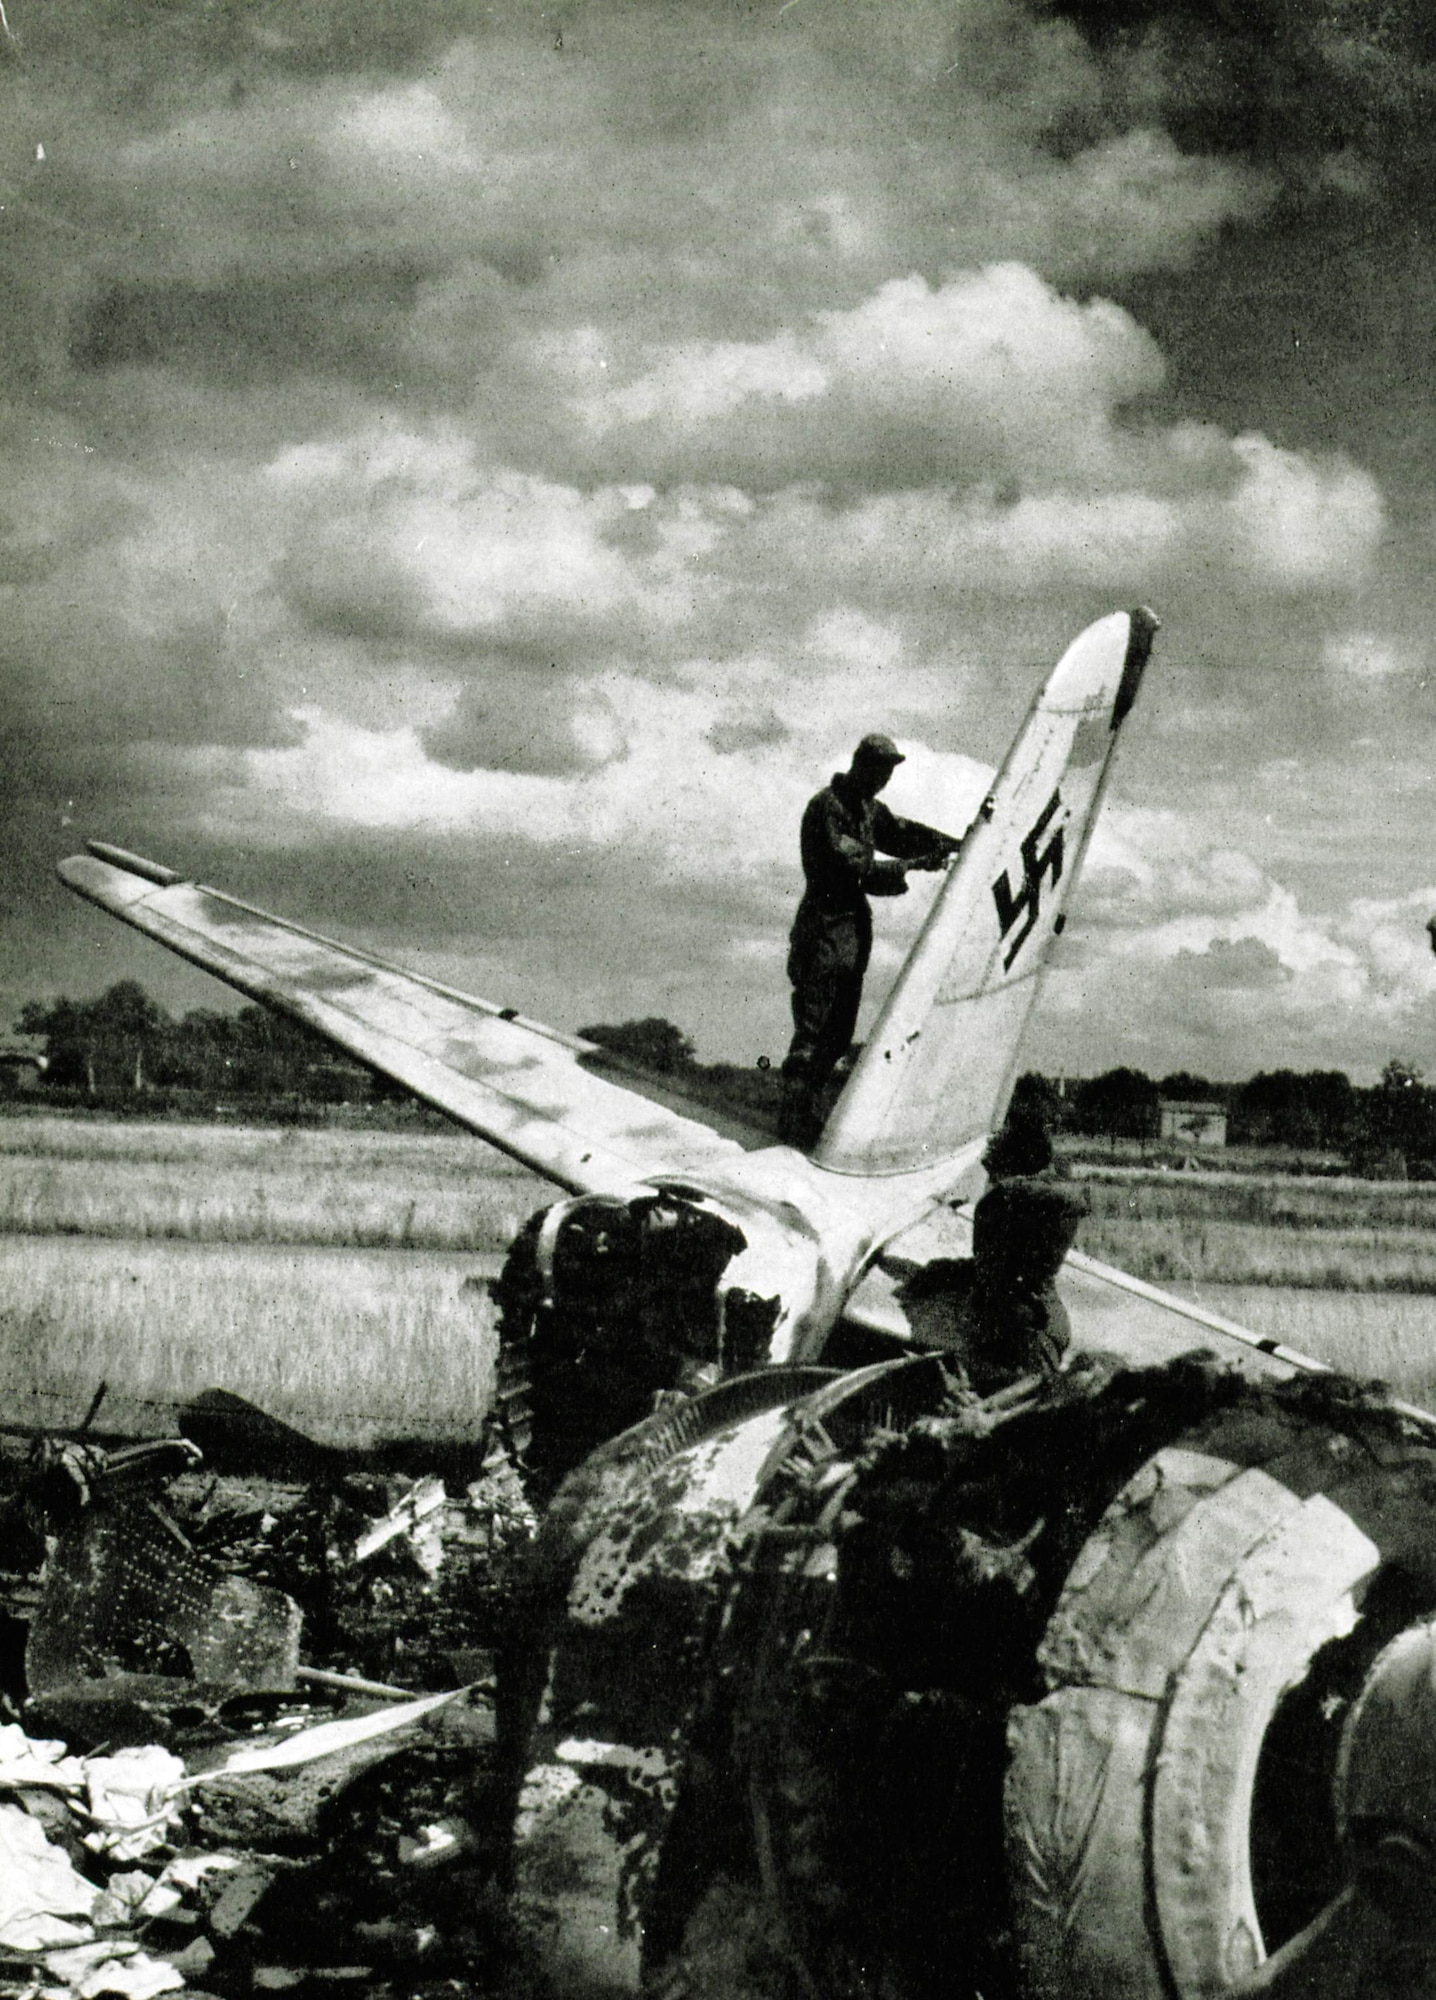 The remains of a German Luftwaffe Ju-88 night fighter litter one of the airfields the 371st Fighter Group operated from during World War II.   The 371st claimed credit for 165 enemy aircraft destroyed on the ground during World War II, and another 71 in the air.  (The Story of the 371st Fighter Group in the E.T.O.)

